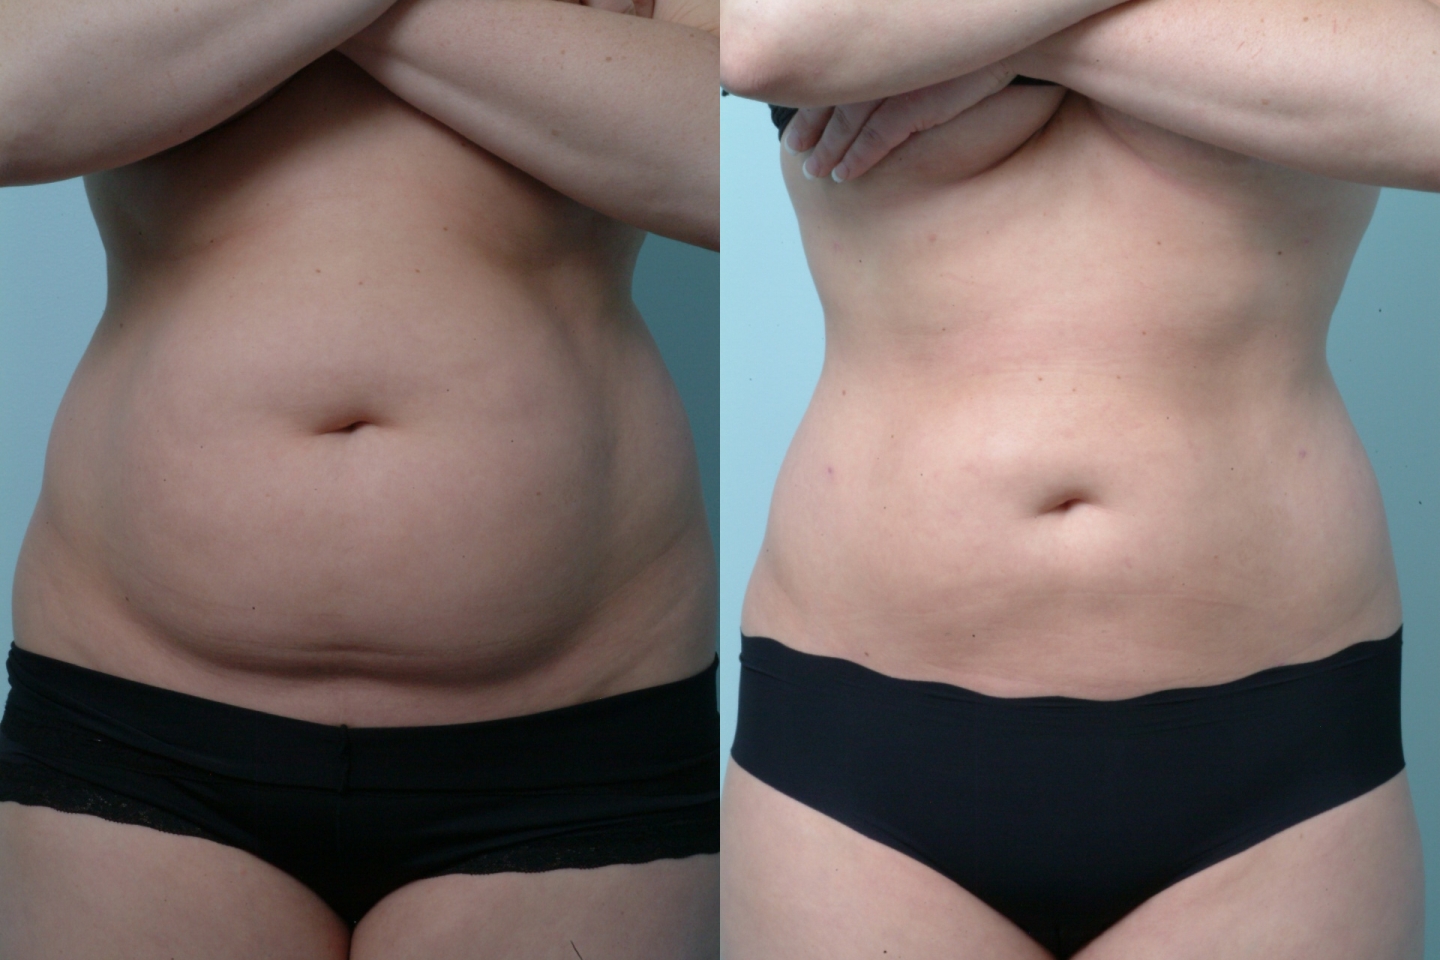 Tummy Liposuction - before and after